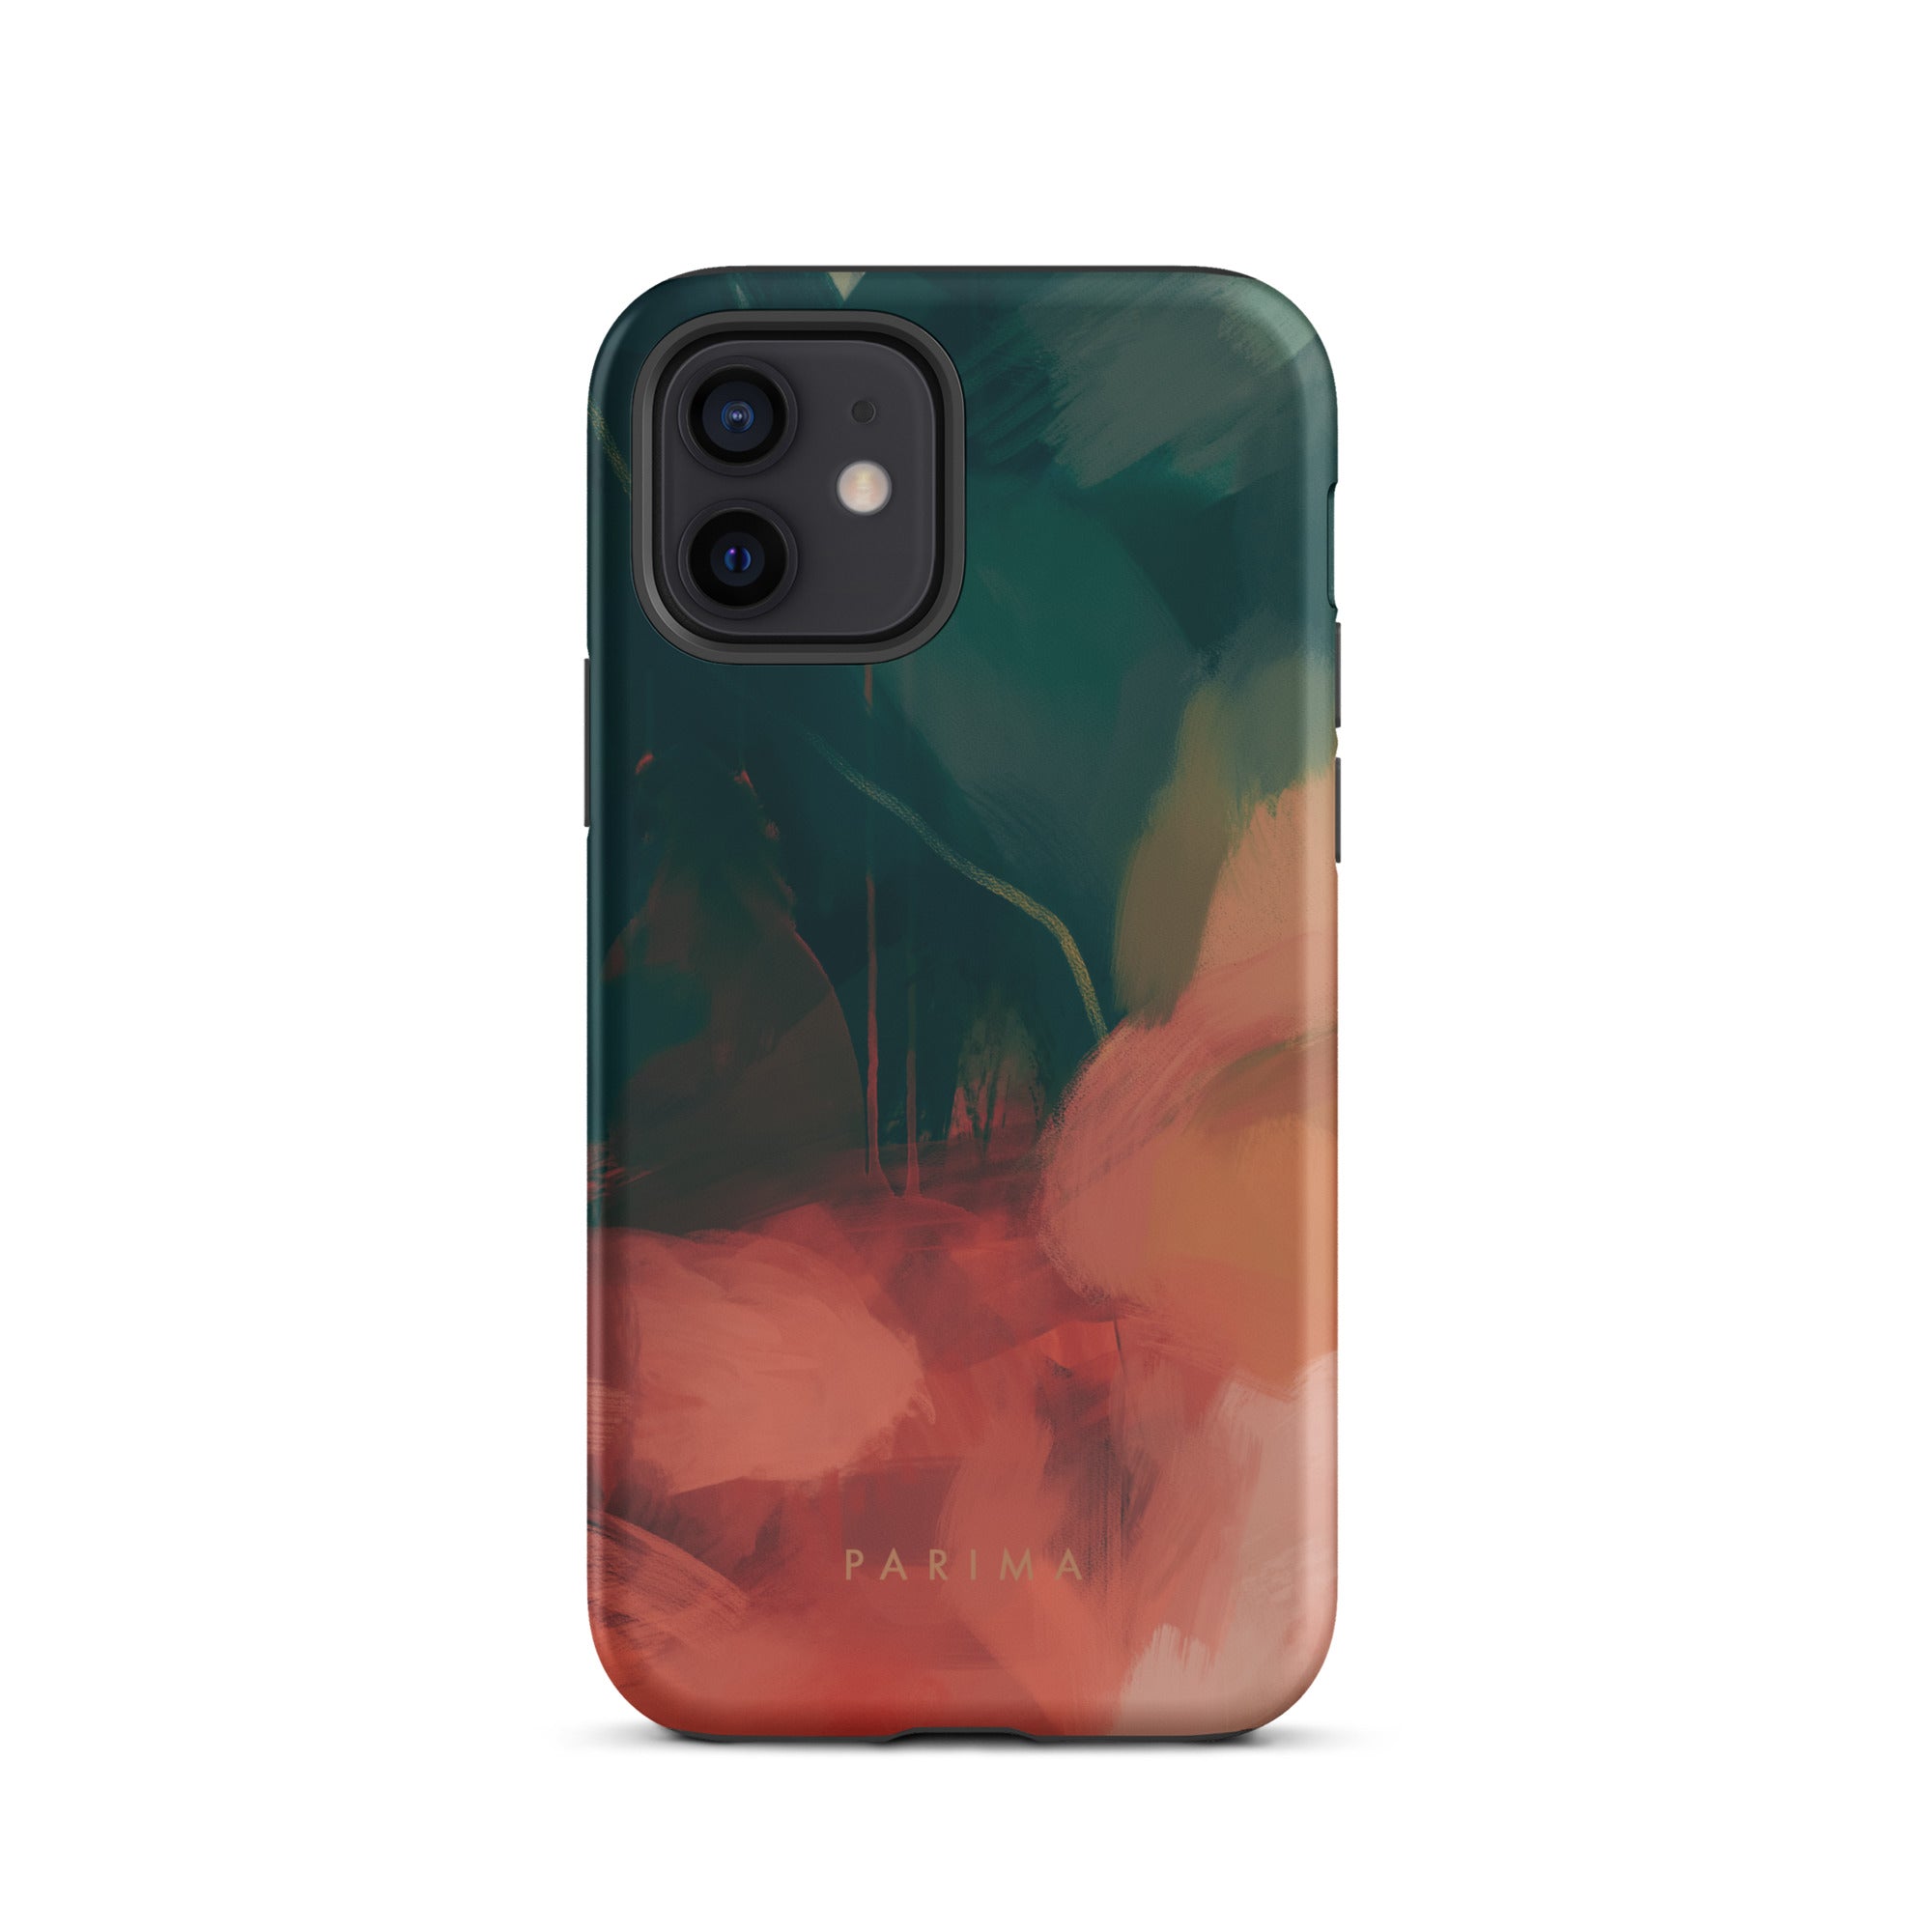 Eventide, green and red abstract art - iPhone 12 tough case by Parima Studio